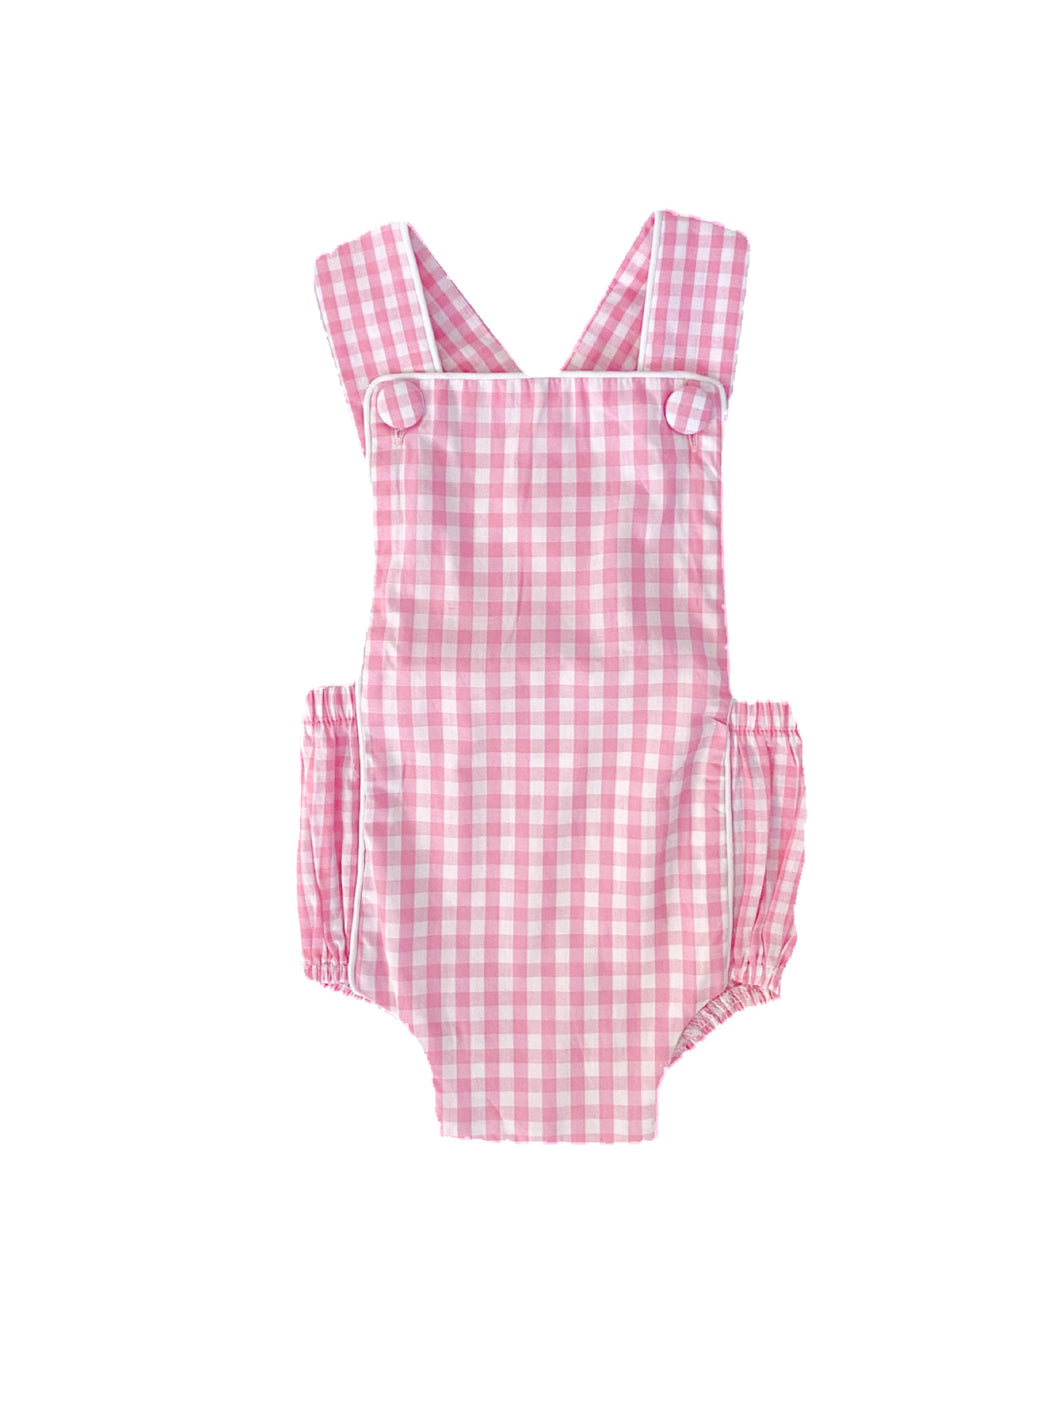 The Strapback Romper - Traditional Pink Gingham